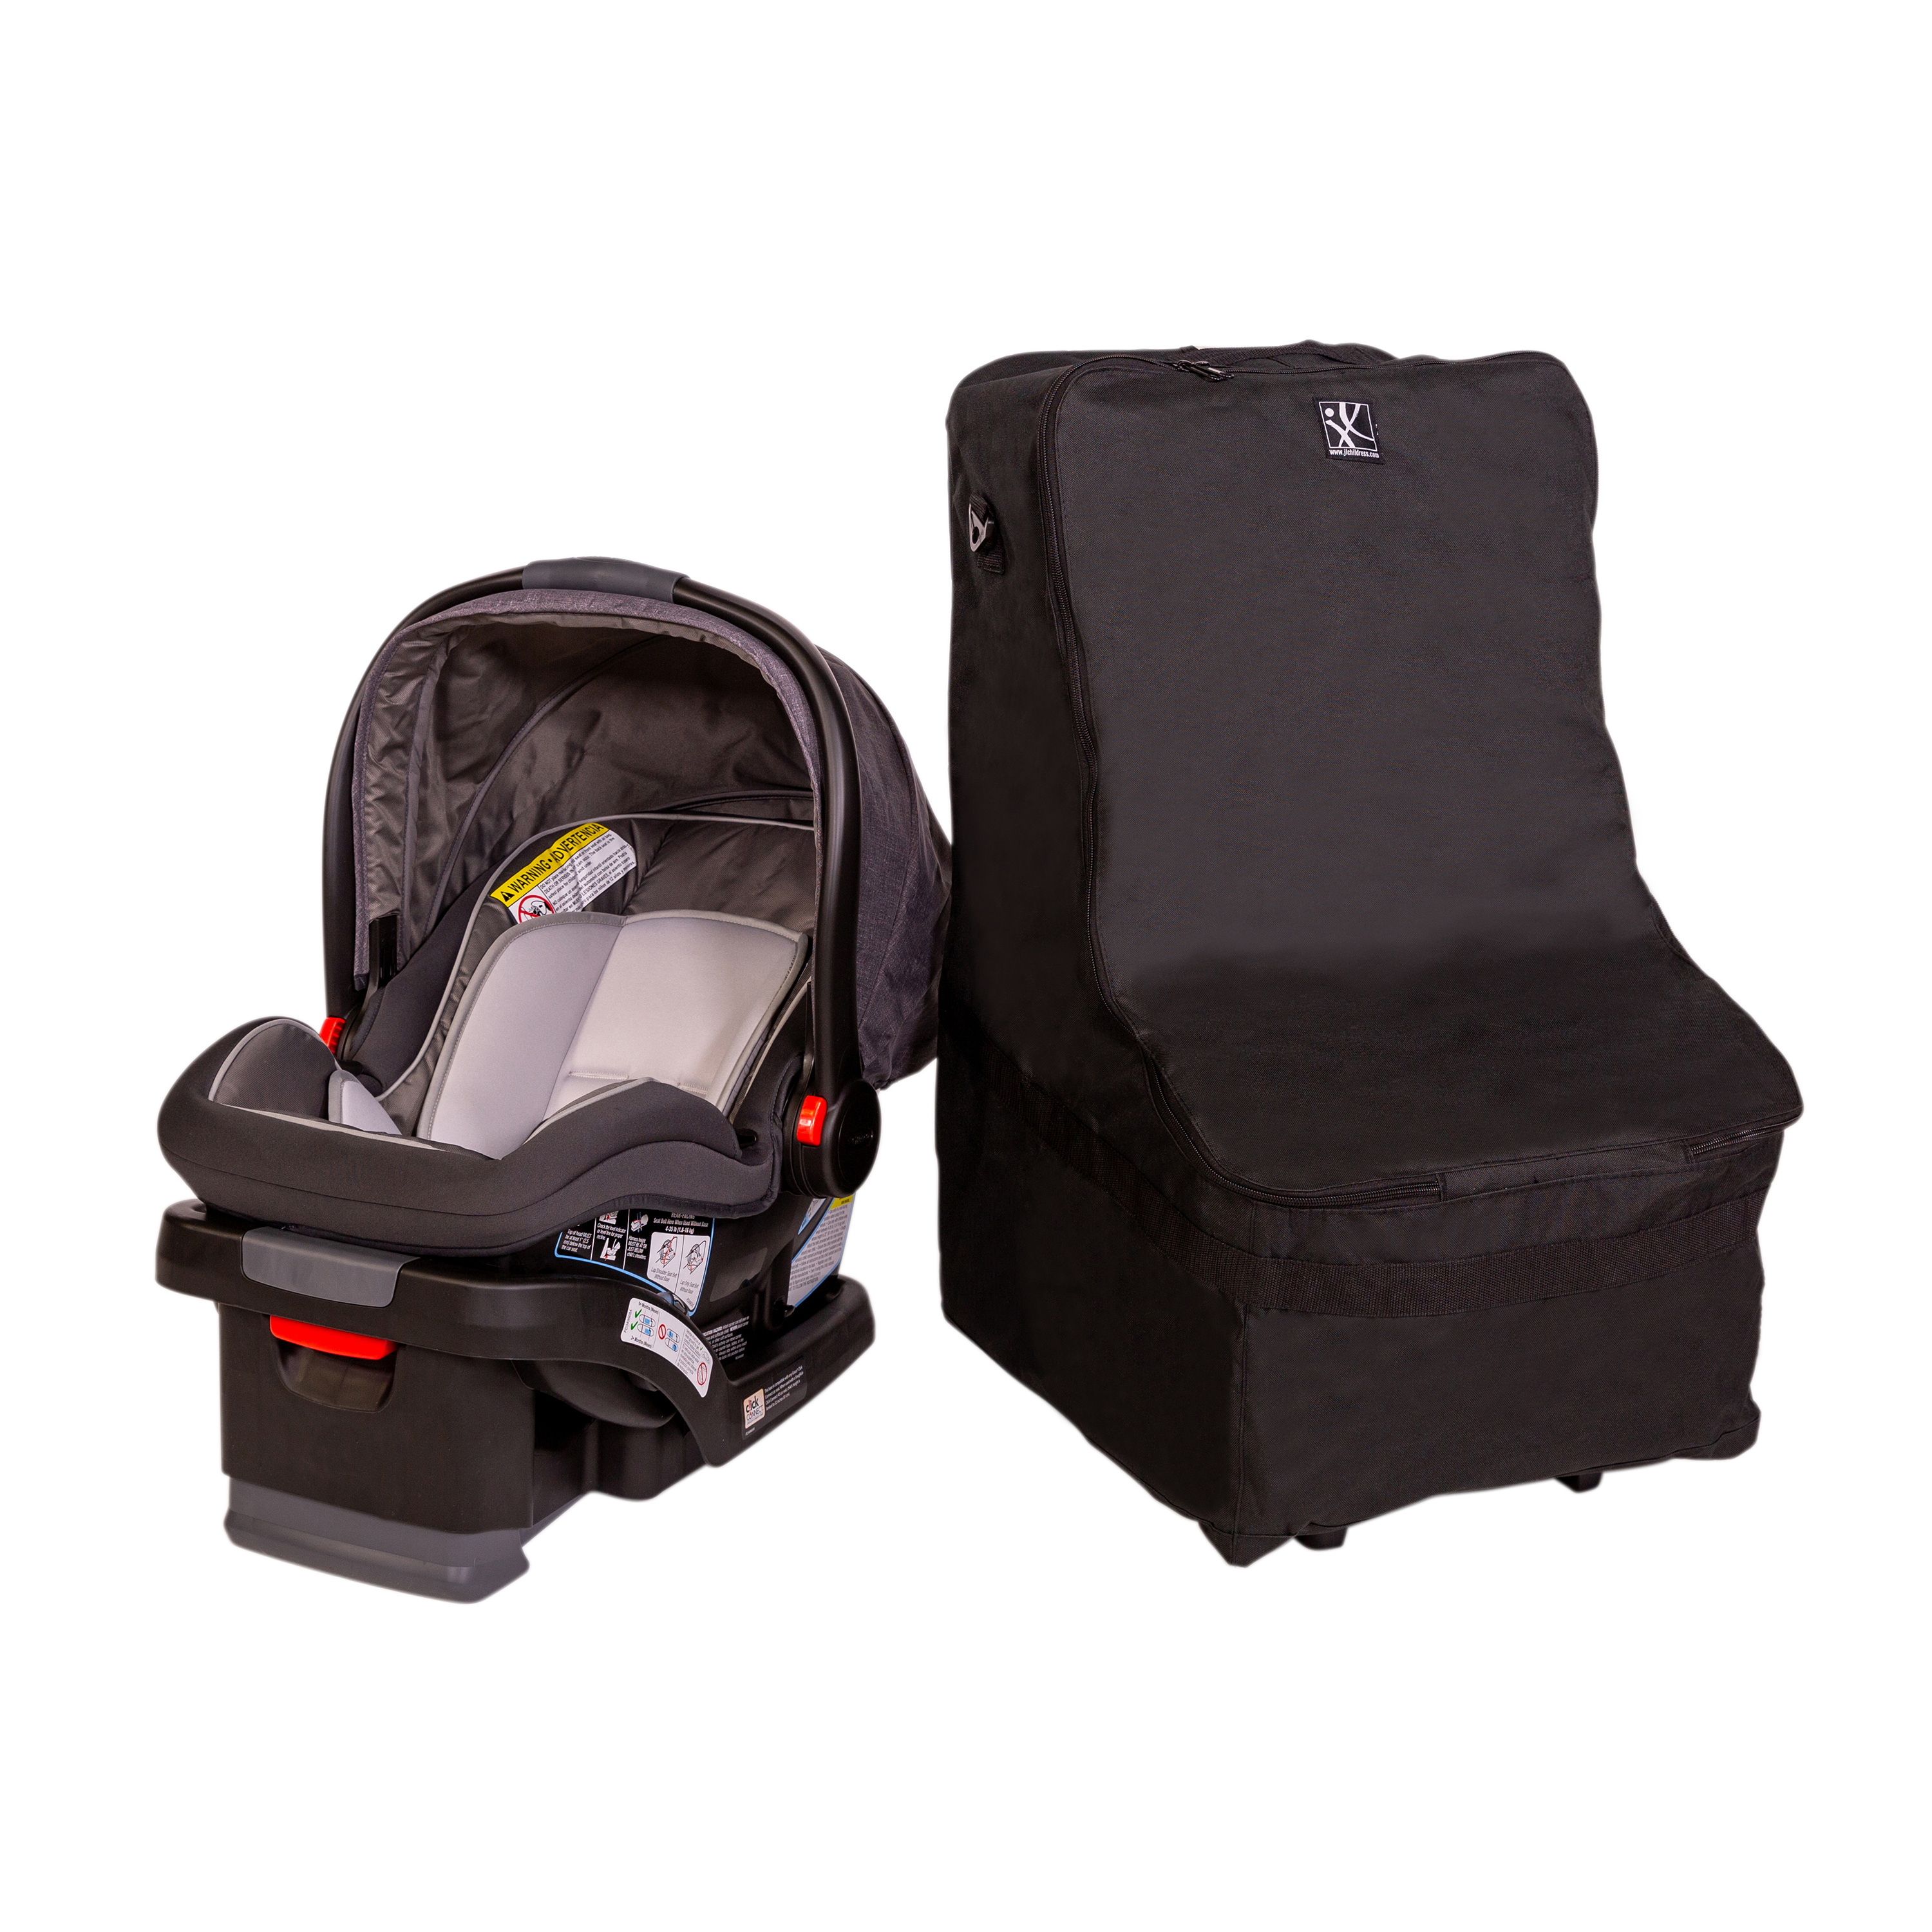 Childress Wheelie Car Seat Travel Bag and Carrier with Wheels, Black 